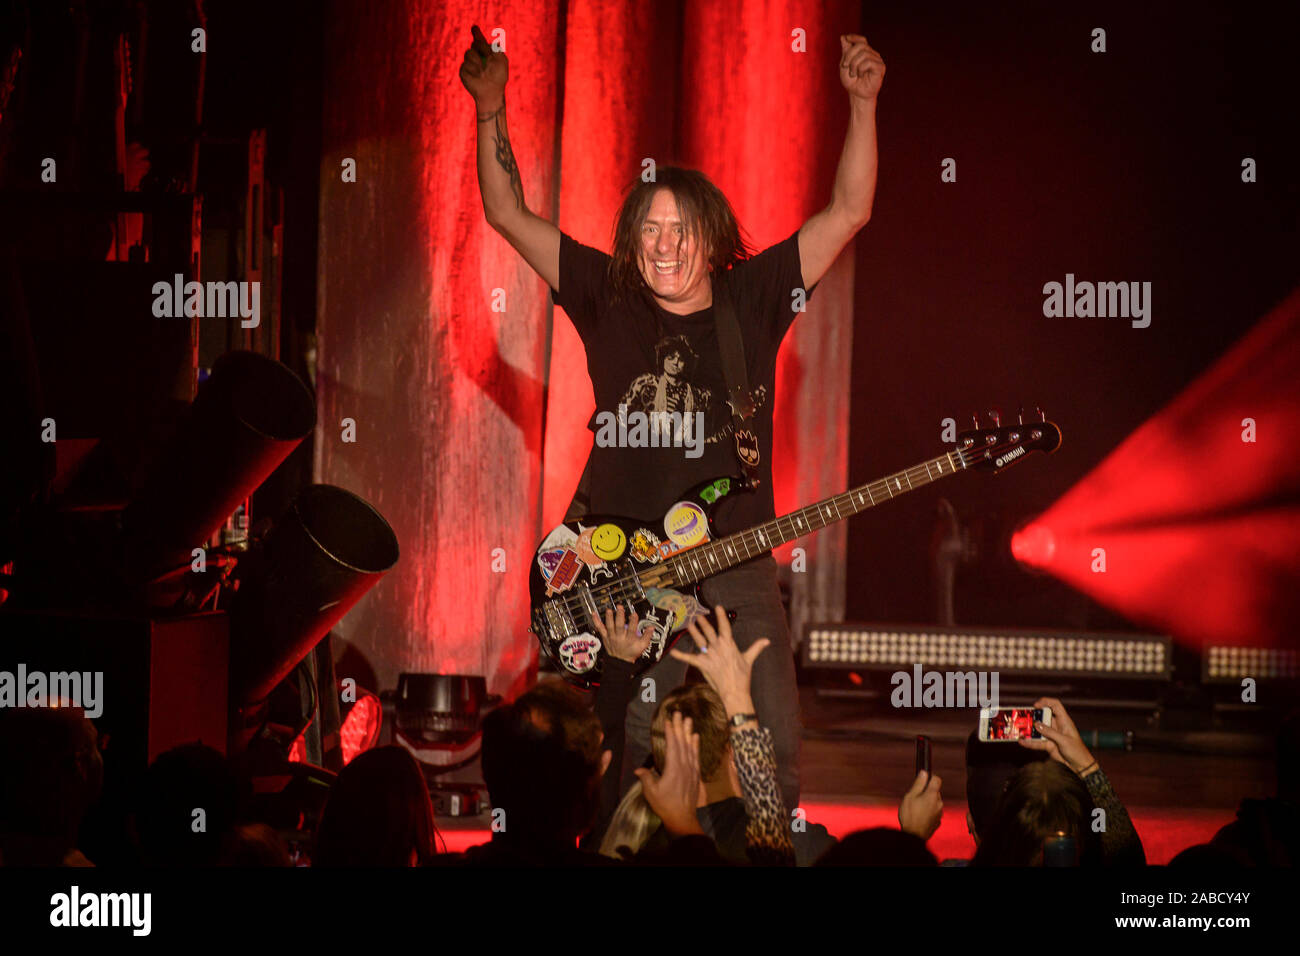 TORONTO, CANADA, NOVEMBER 25, 2019:Robby Takac of American rock band Goo Goo Dolls, performs during a sold out show in Toronto. Stock Photo